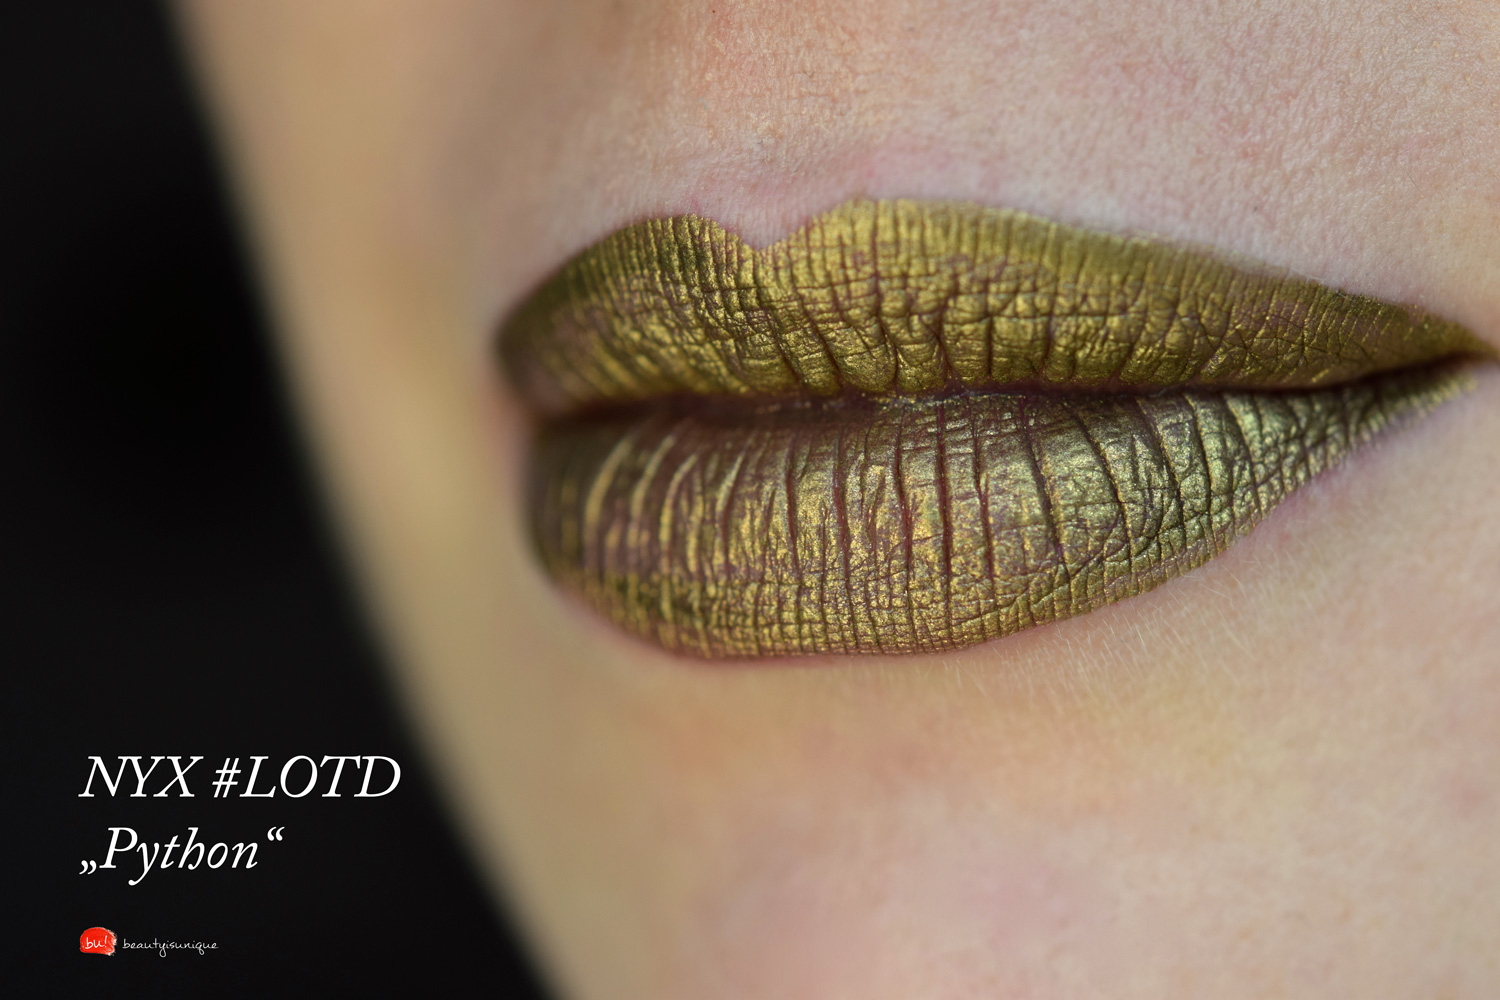 nyx-loth-python-lip-of-the-day